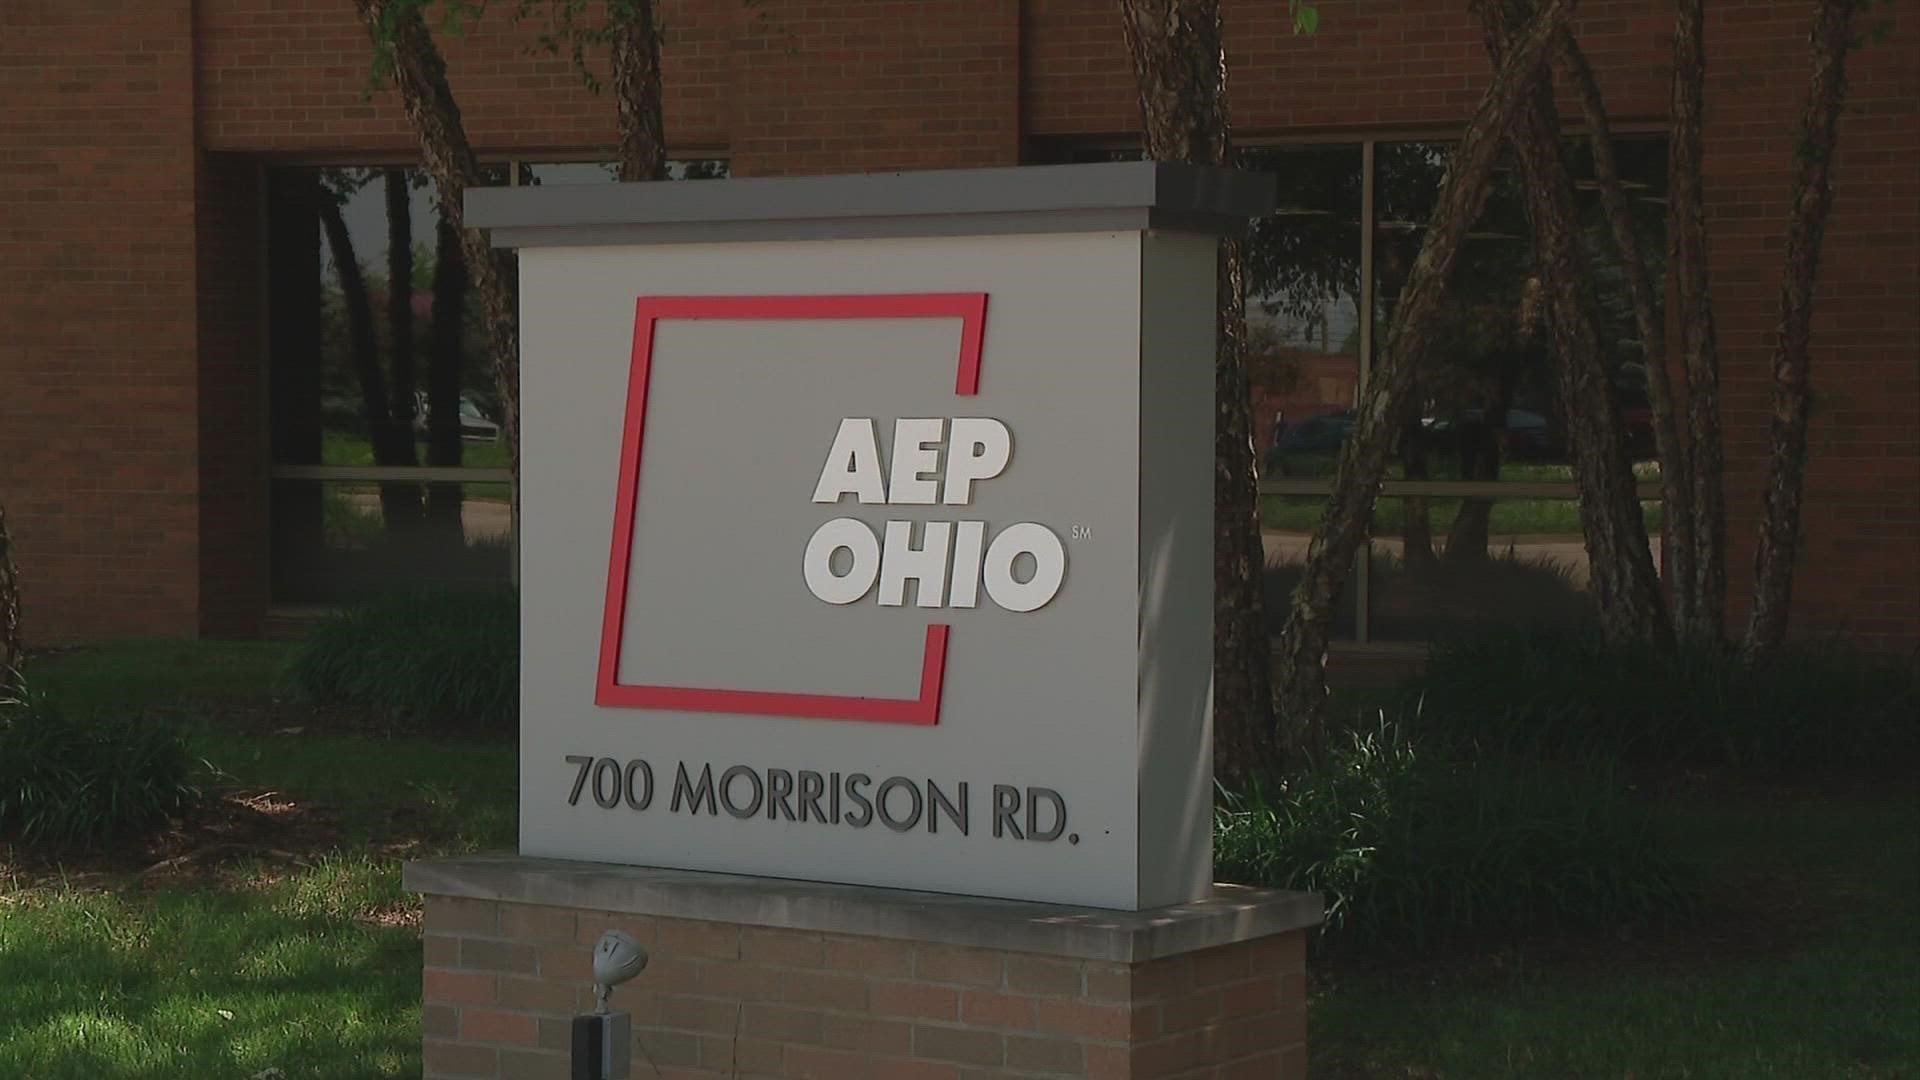 Columbus Urban League President and CEO Stephanie Hightower said the community her organization serves was hit hard by the recent AEP Ohio power outages.